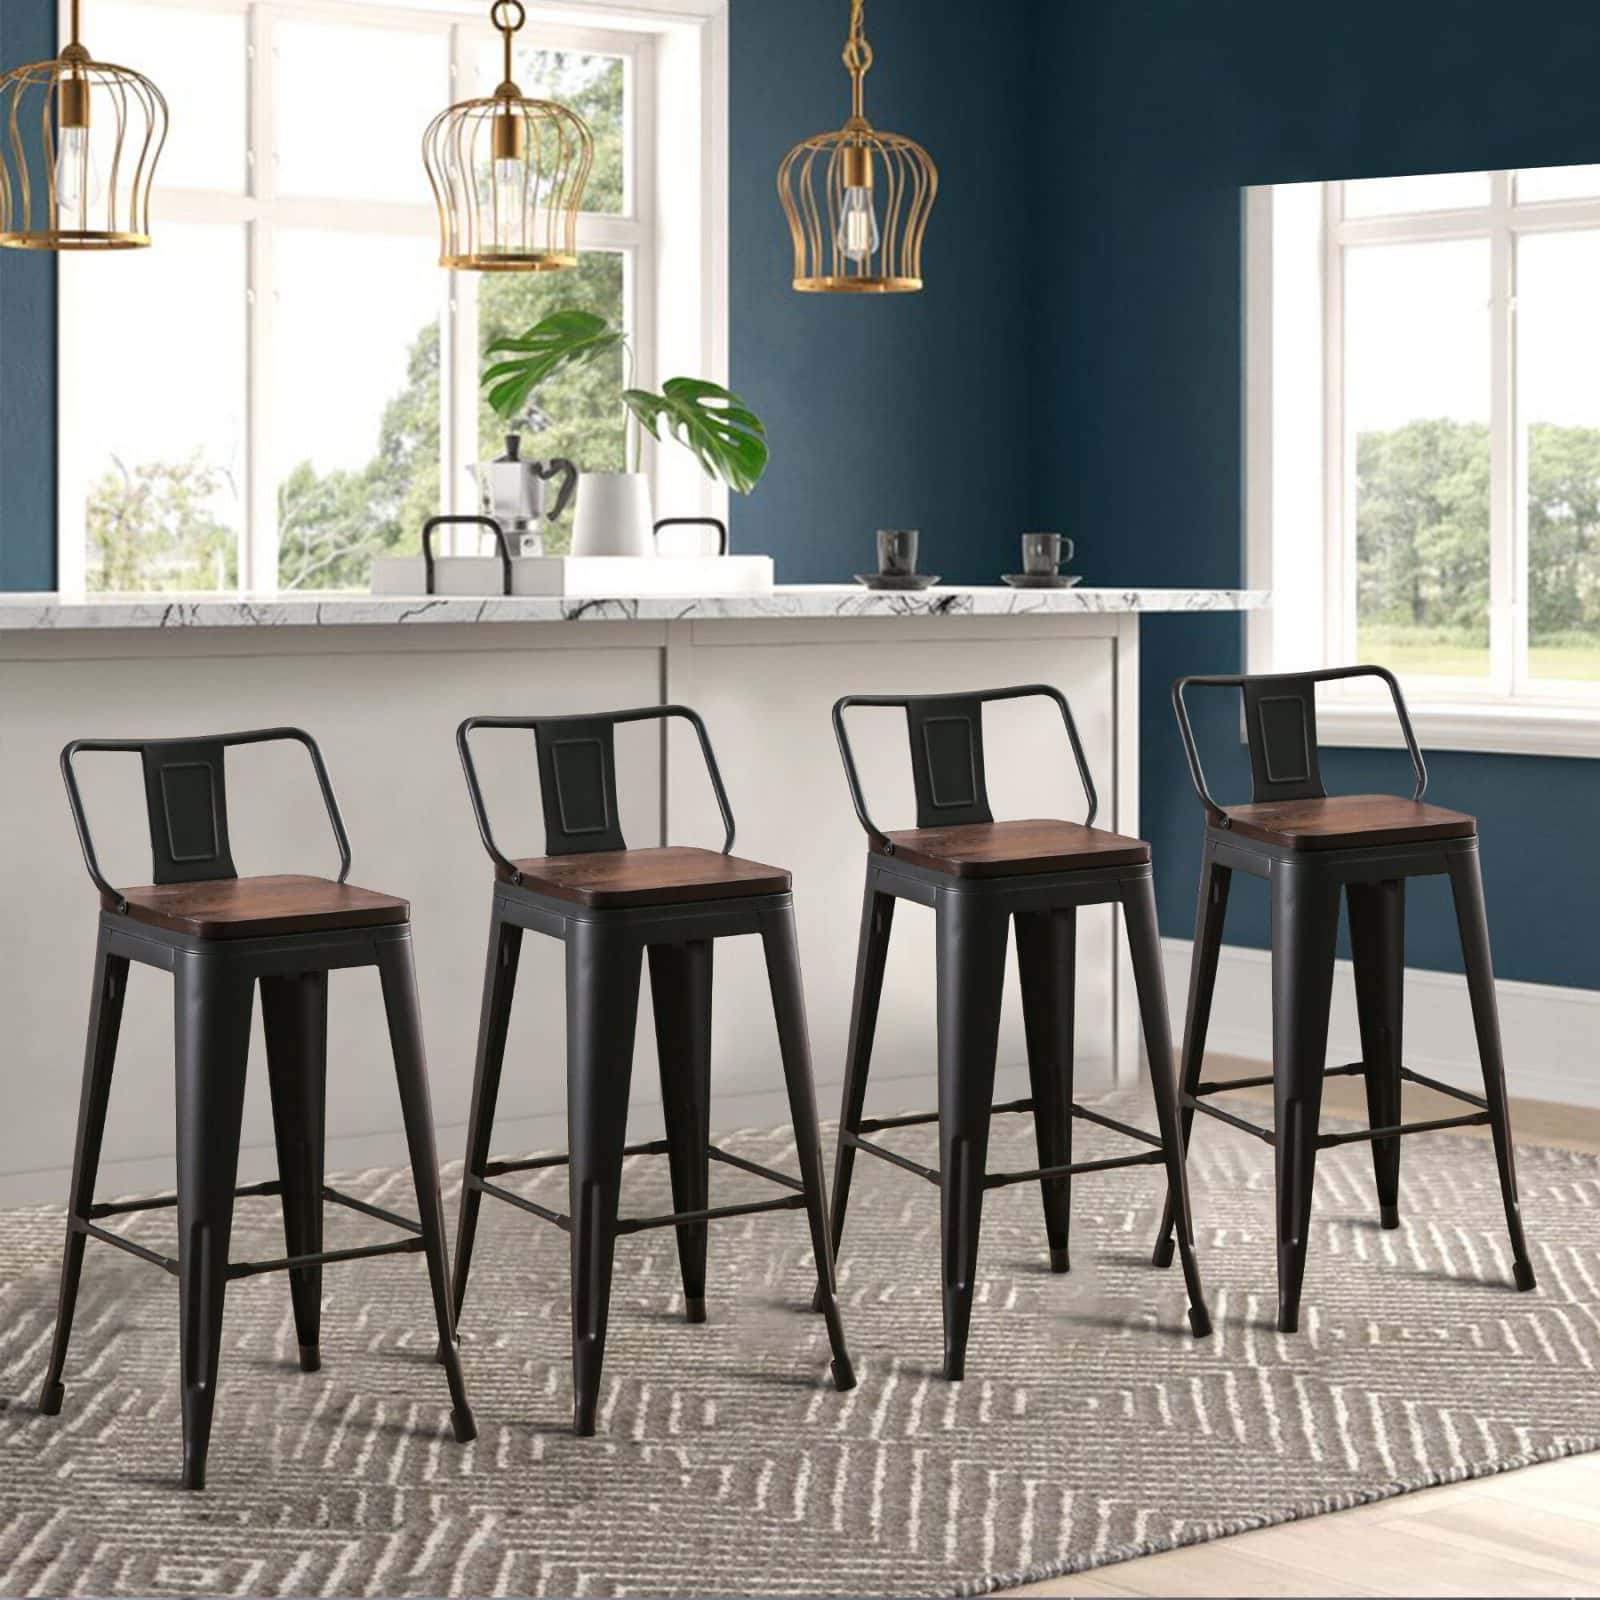 15 Best Stools for Kitchen Island